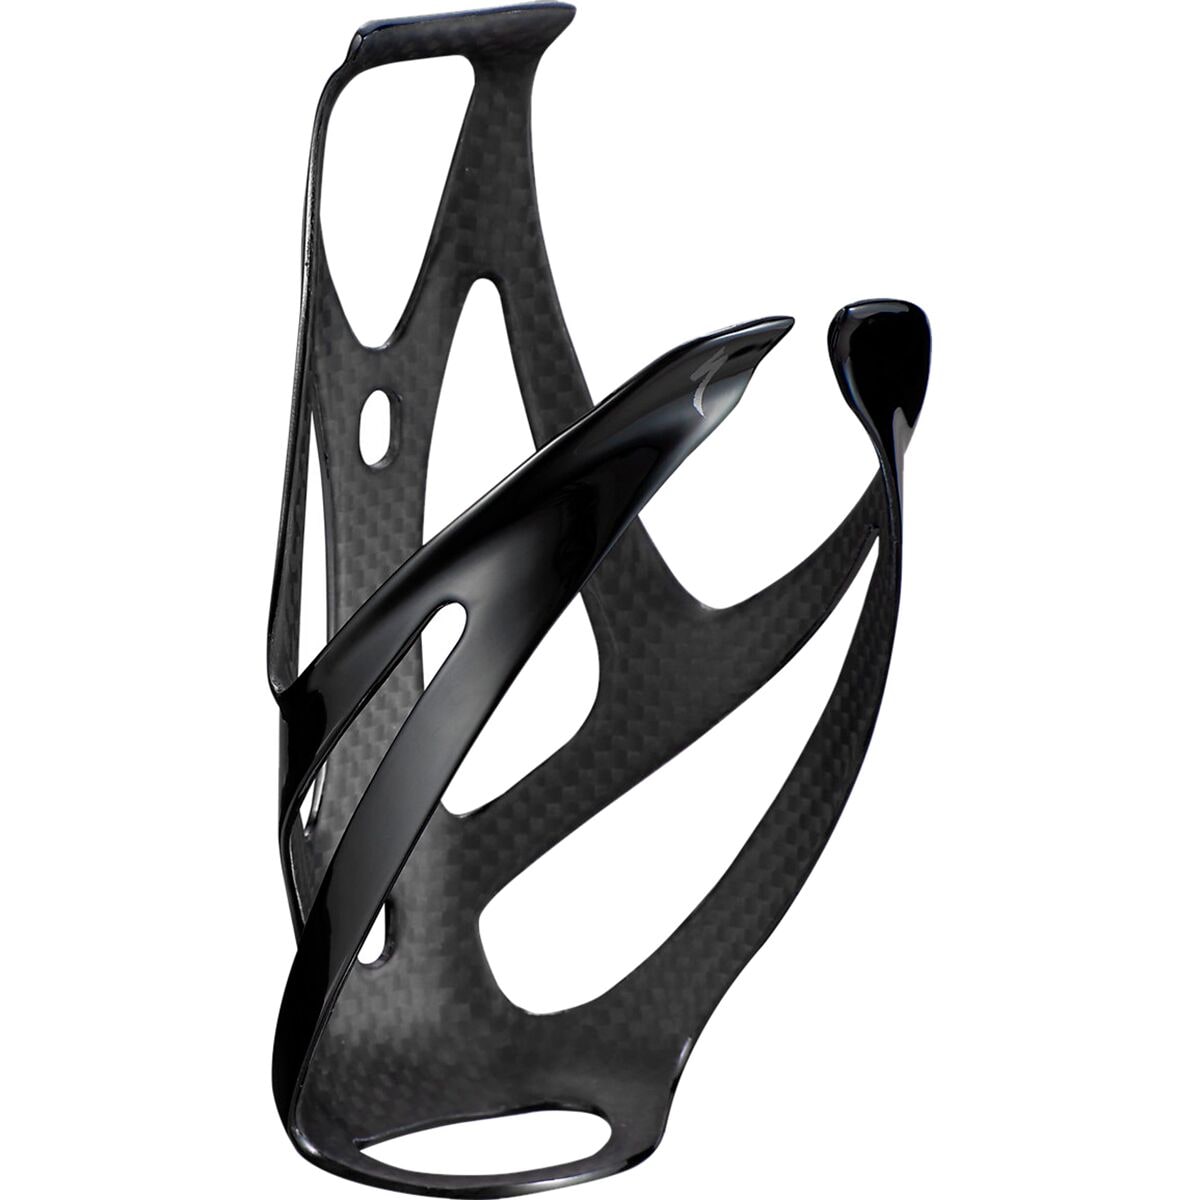 Specialized S-Works Carbon Rib Cage III Carbon/Gloss Black, One Size